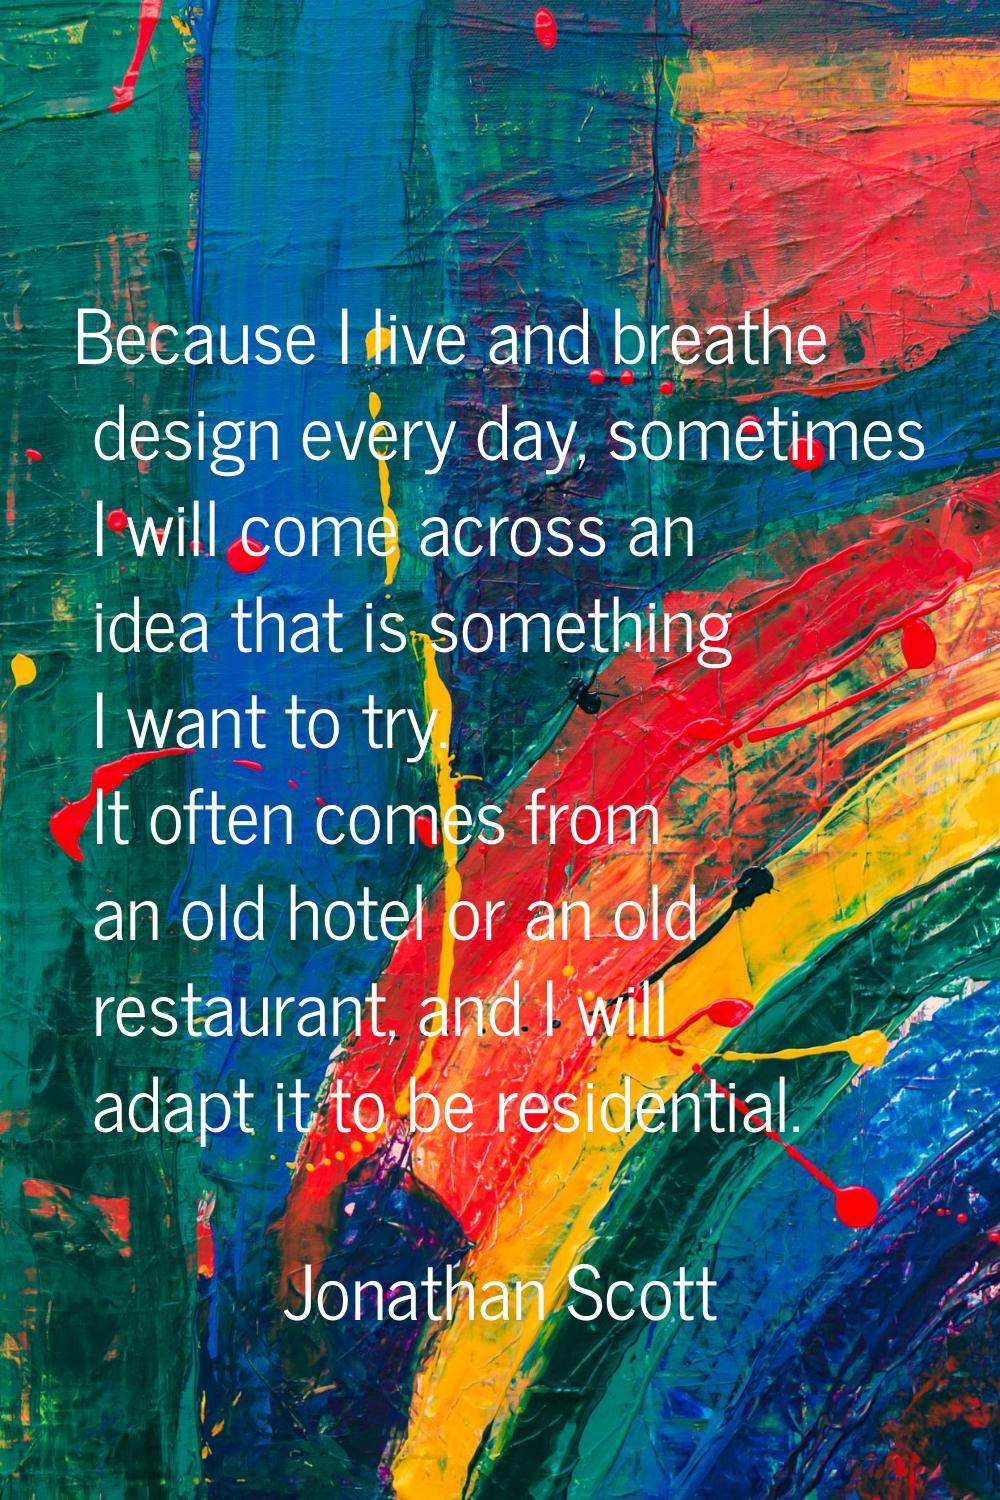 Because I live and breathe design every day, sometimes I will come across an idea that is something